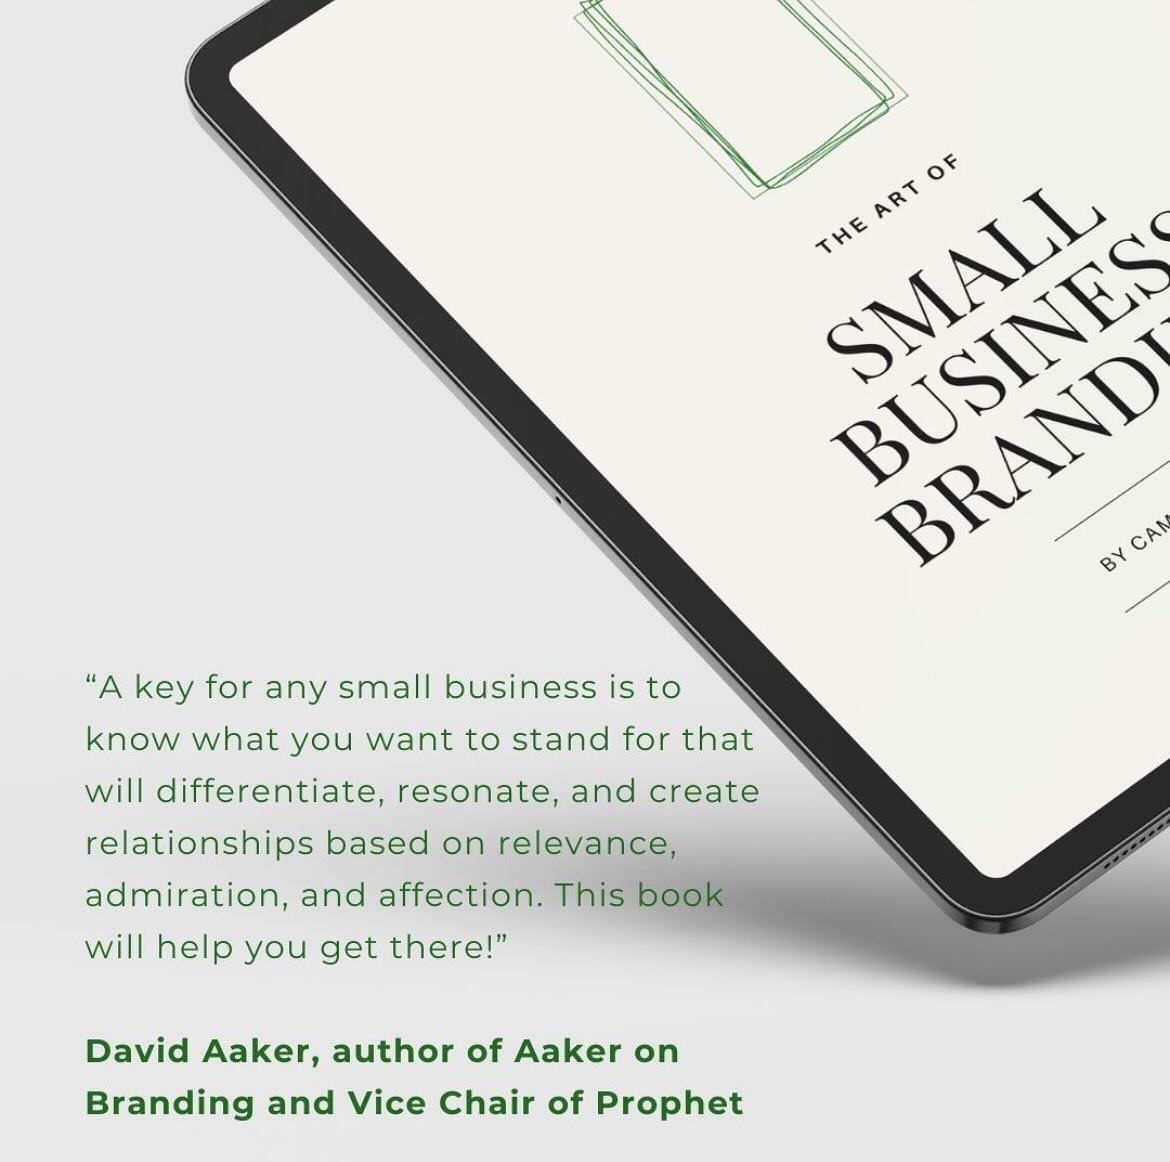 I wrote &ldquo;The Art of Small Business Branding&rdquo; with the goal of creating a single book that covers everything a small business owner needs to know to build a unique, loved, and profitable brand and do it successfully! 

My second goal for t